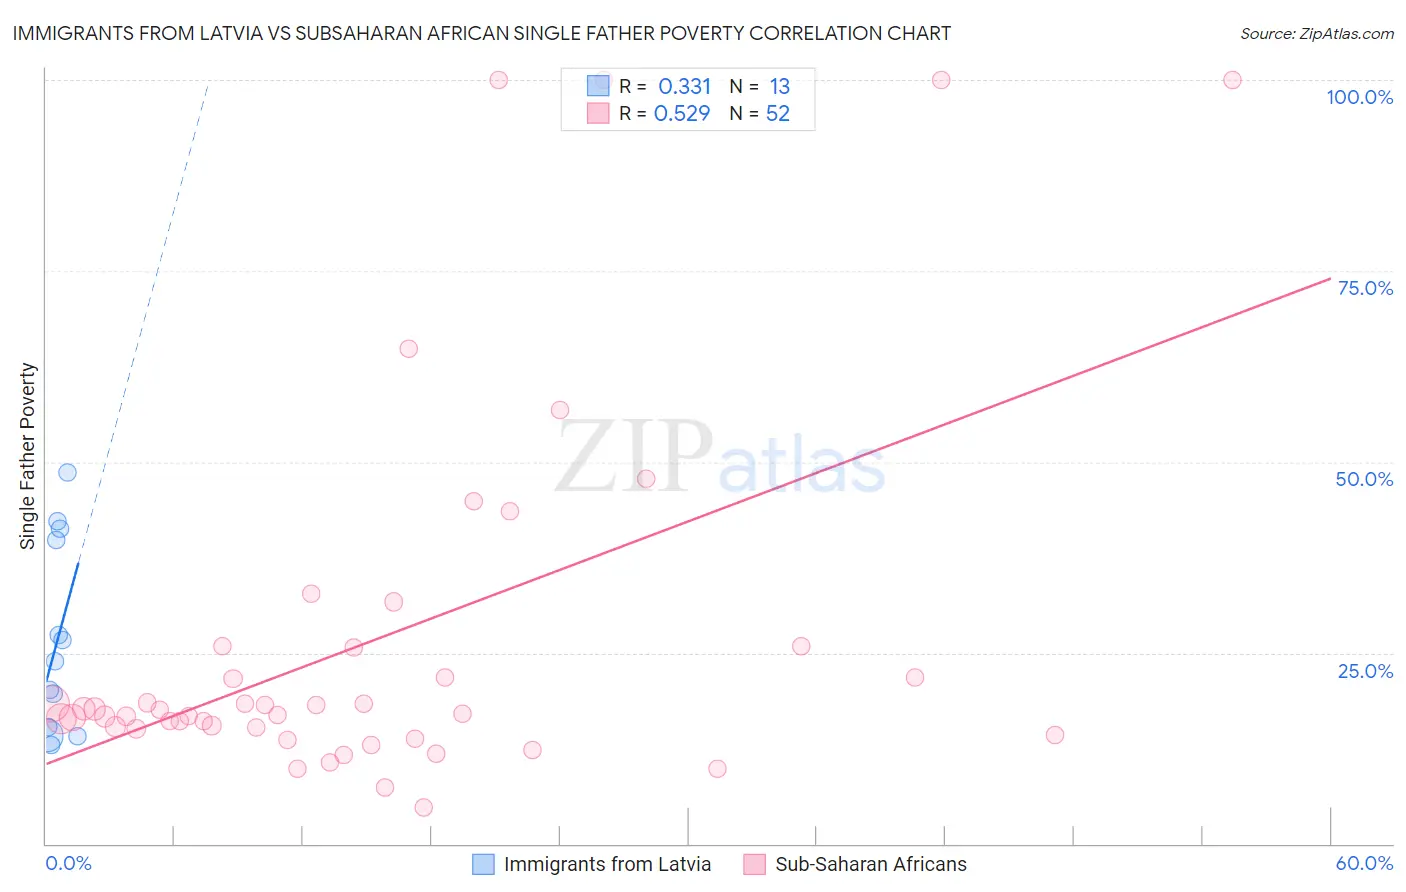 Immigrants from Latvia vs Subsaharan African Single Father Poverty